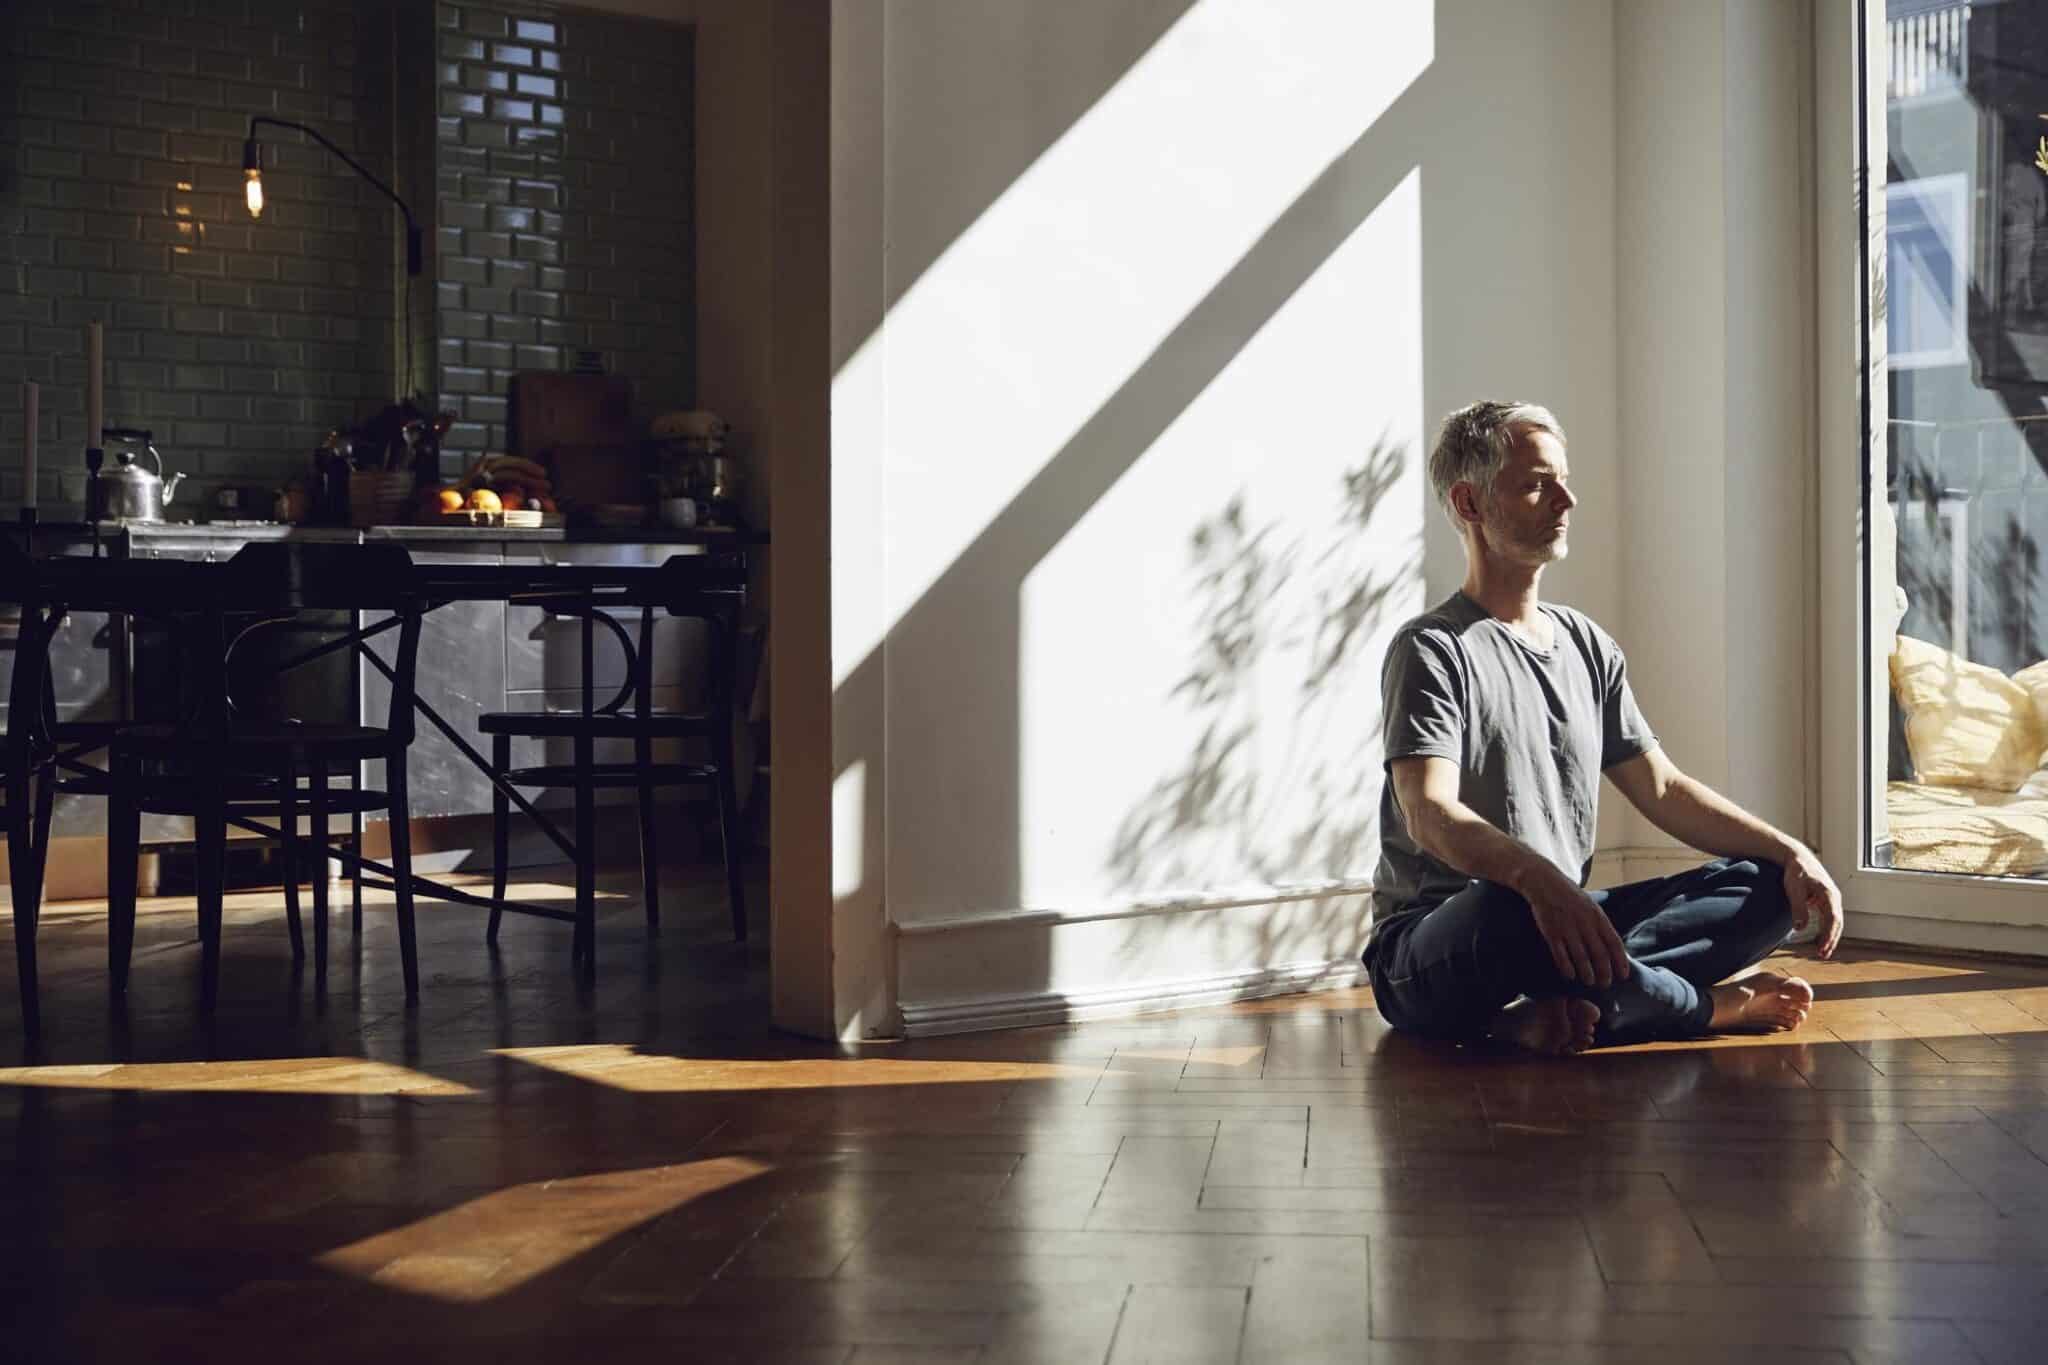  man sitting on the floor at home meditating